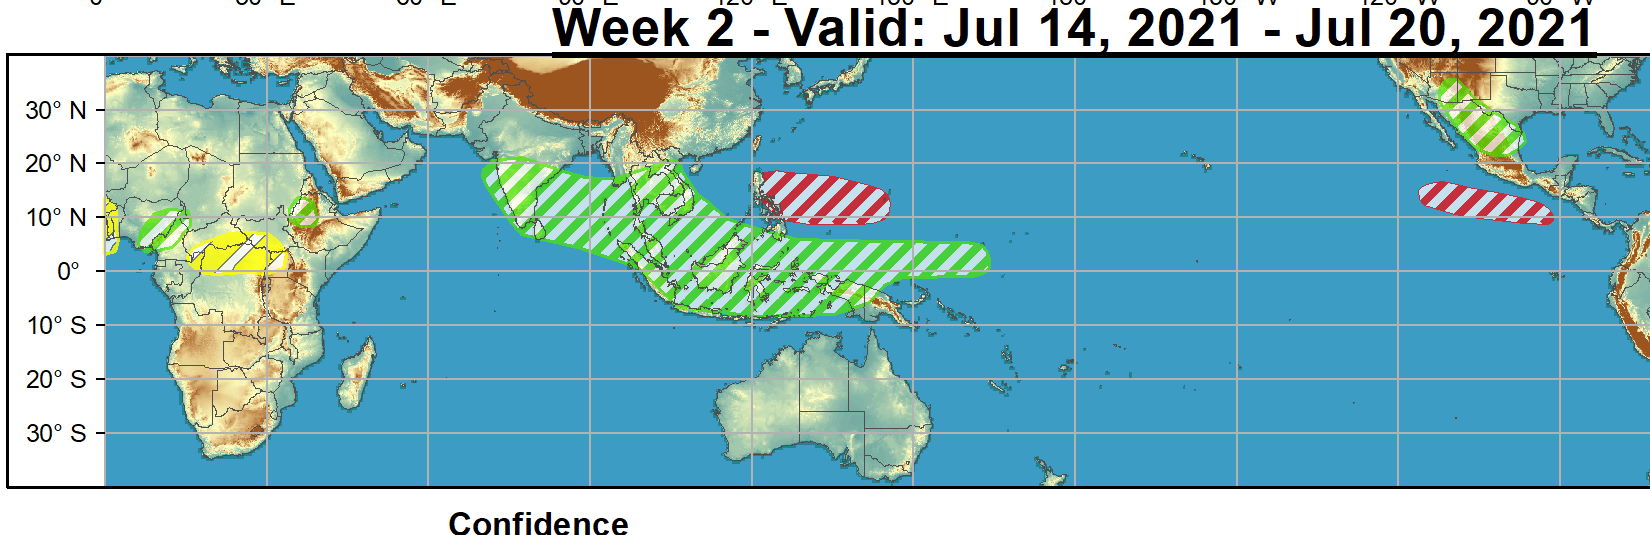 Large-scale conditions for Tropical Cyclone development are forecast to improve across the West Pacific by week-2. The ECMWF model remains the most bullish with TC development across the East Pacific by week-2, and wind shear is expected to diminish later in this period; therefore there is moderate confidence for tropical cyclone formation over the East Pacific during week-2. NOAA.